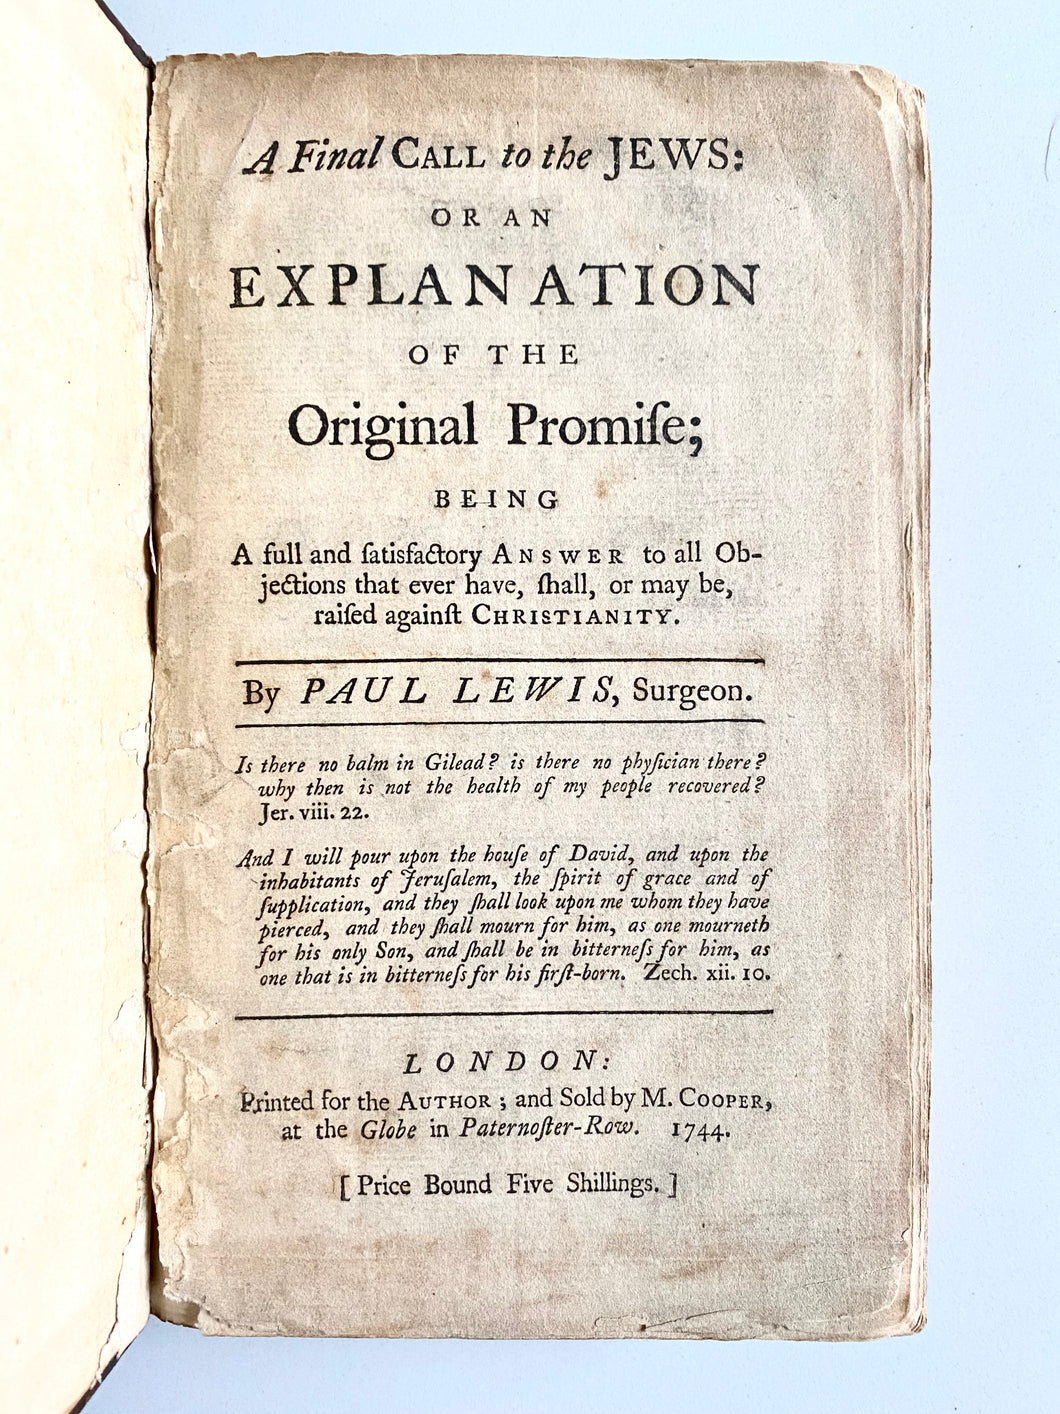 1744 PAUL LEWIS. A Final Call to the Jews. Very Rare Early Text of Jewish Evangelism - Jesus as Messiah.